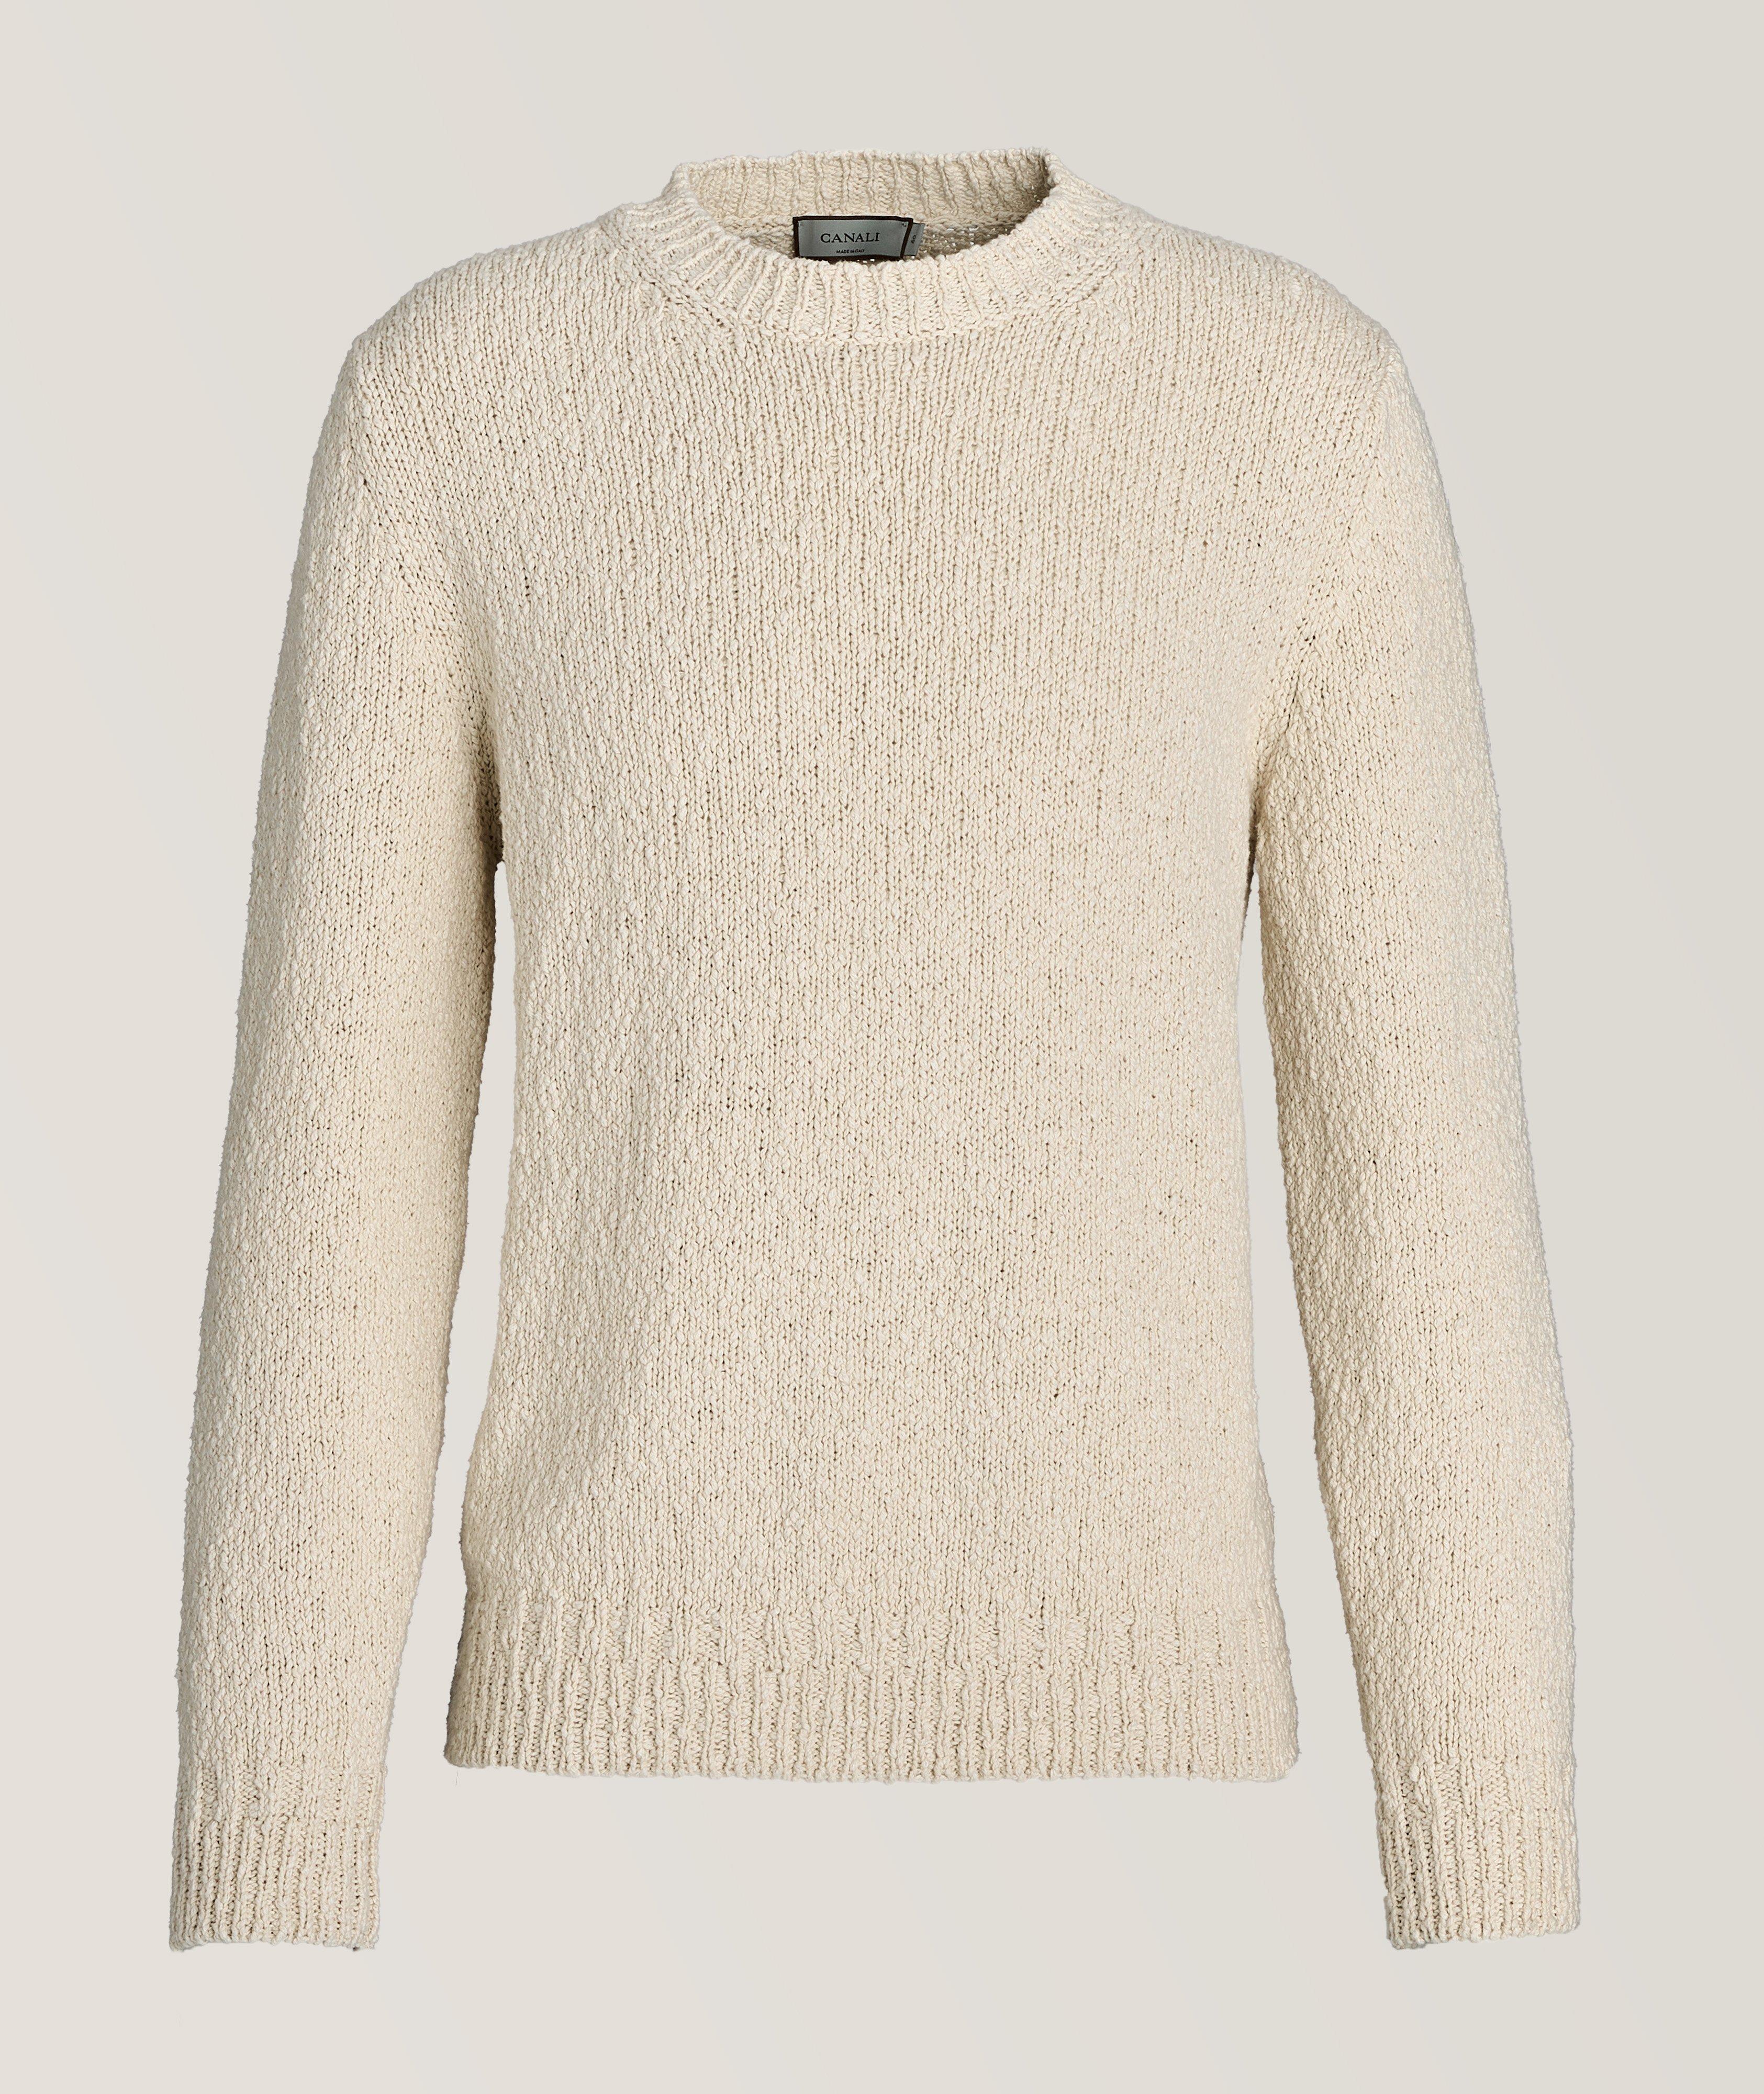 Canali Textured Cotton Sweater